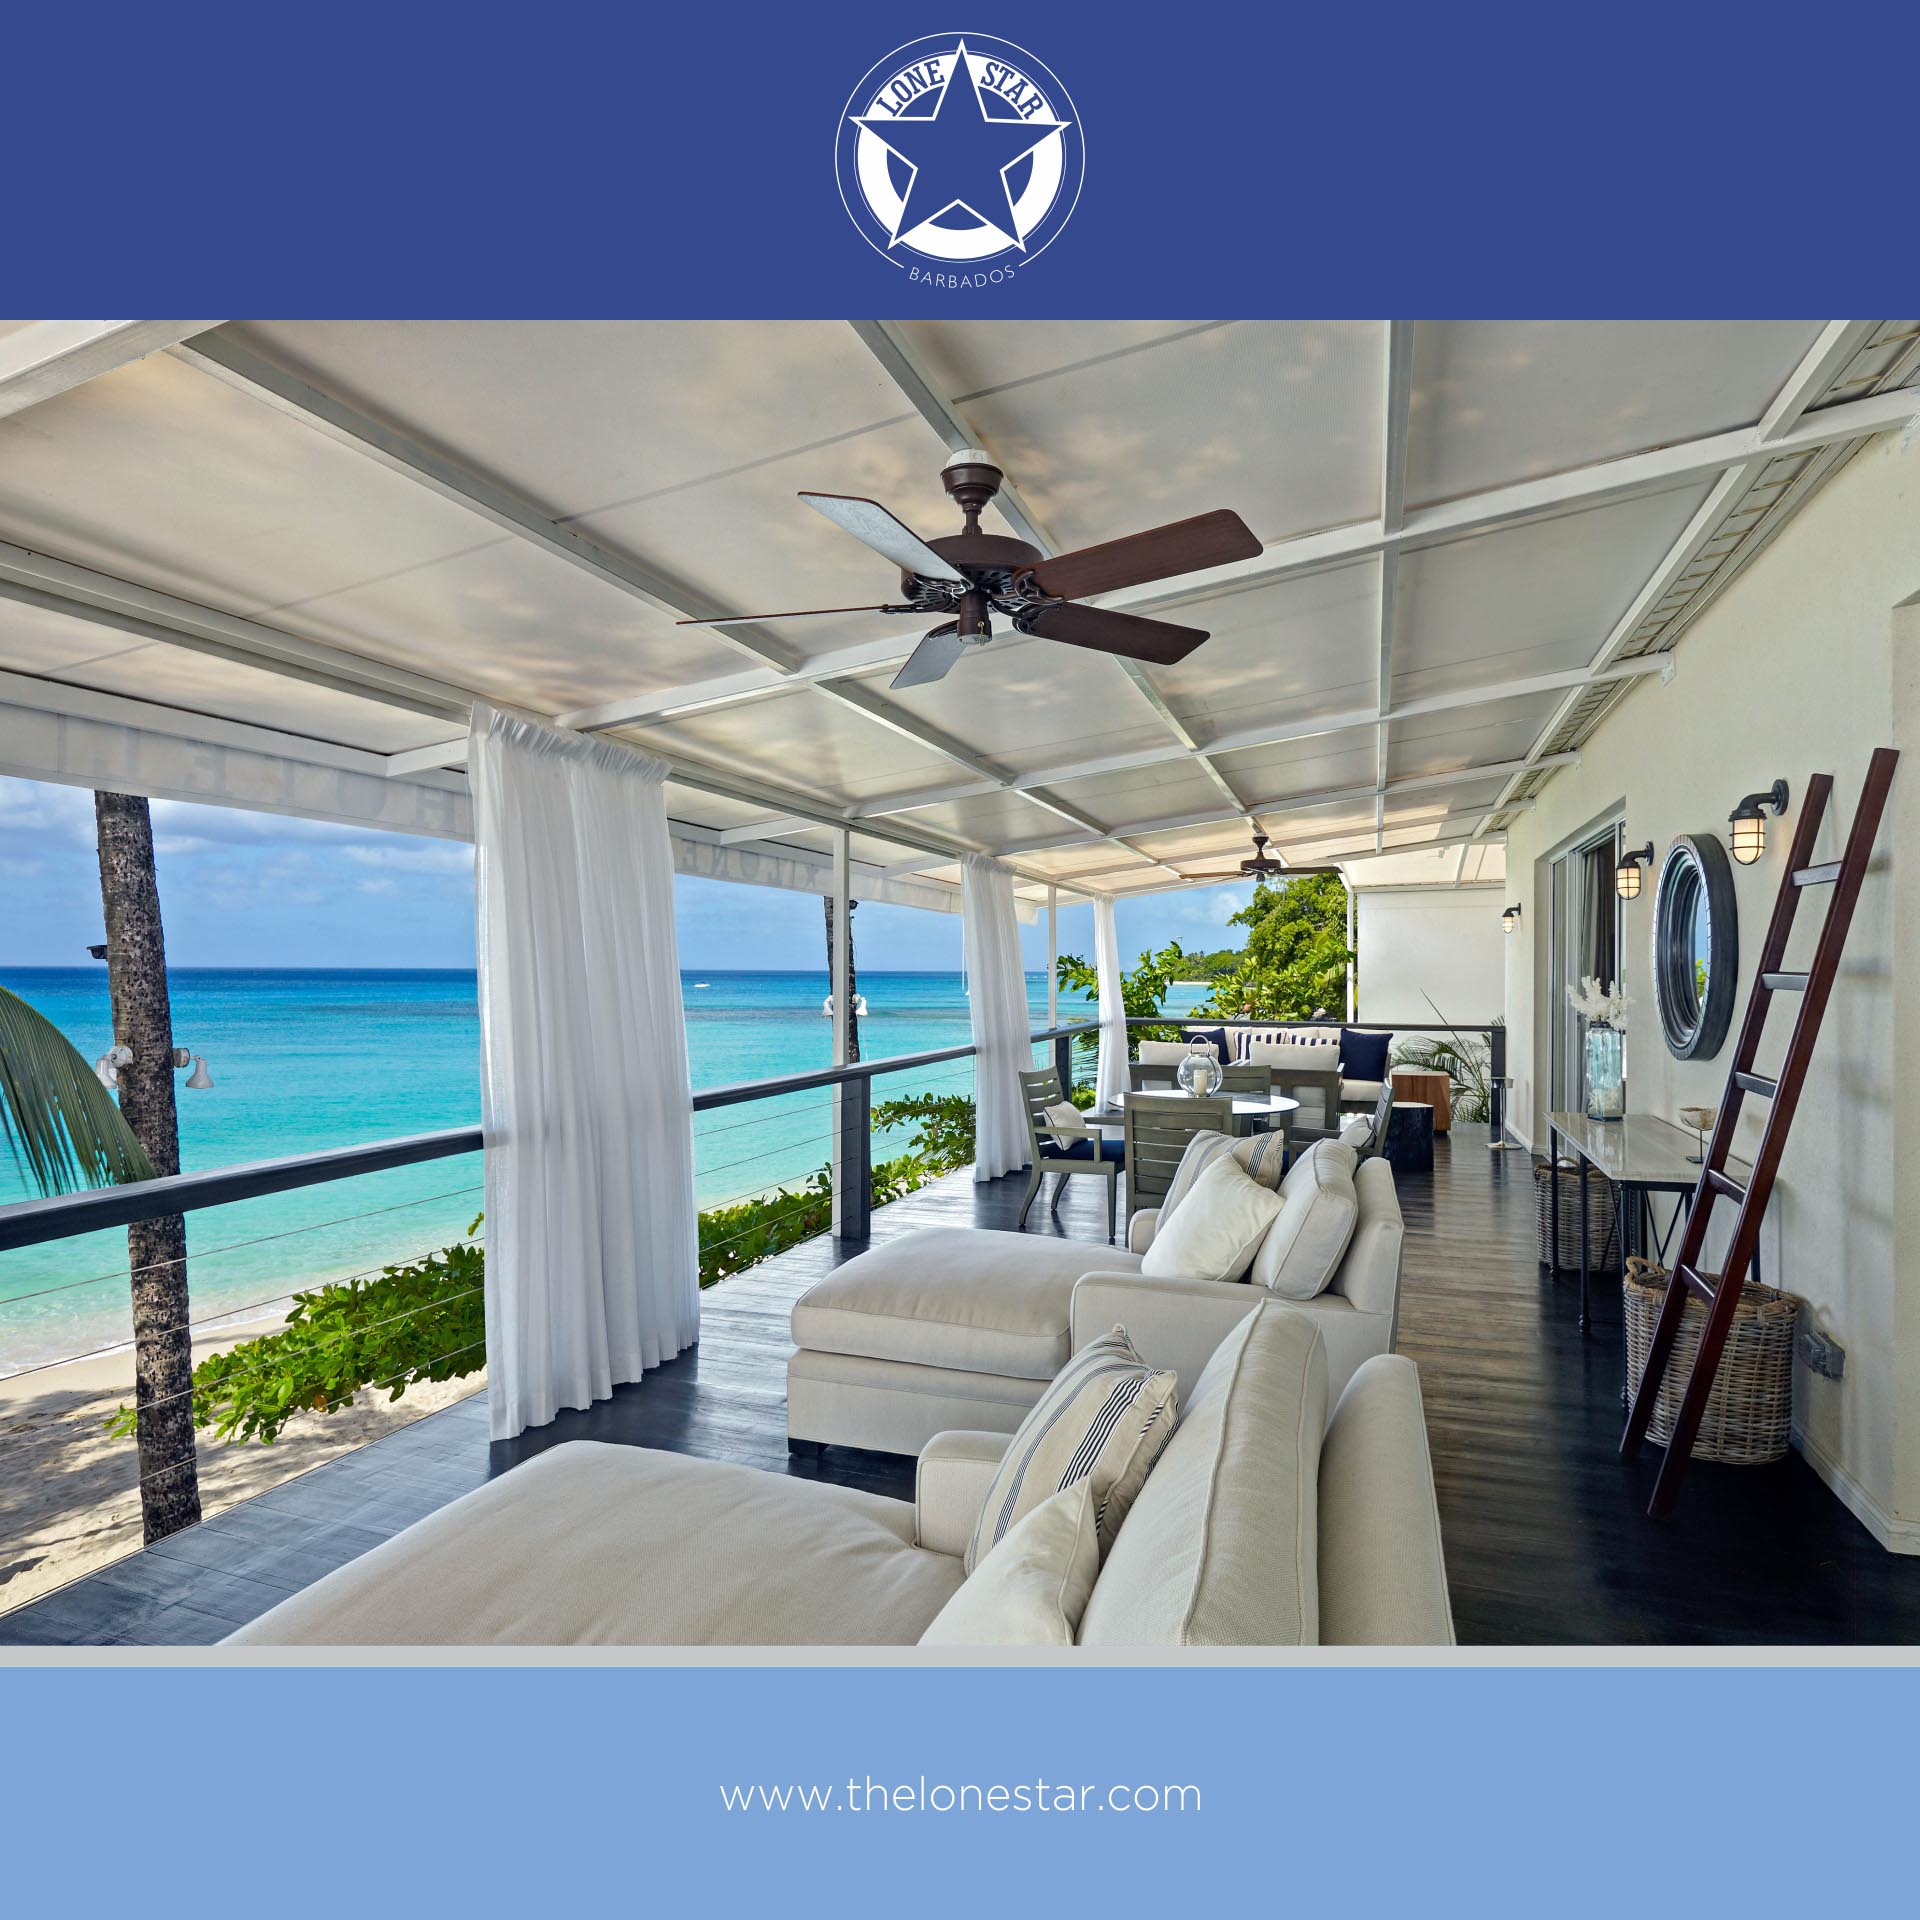 The Luxury Lone Star Hotel and Restaurant Barbados